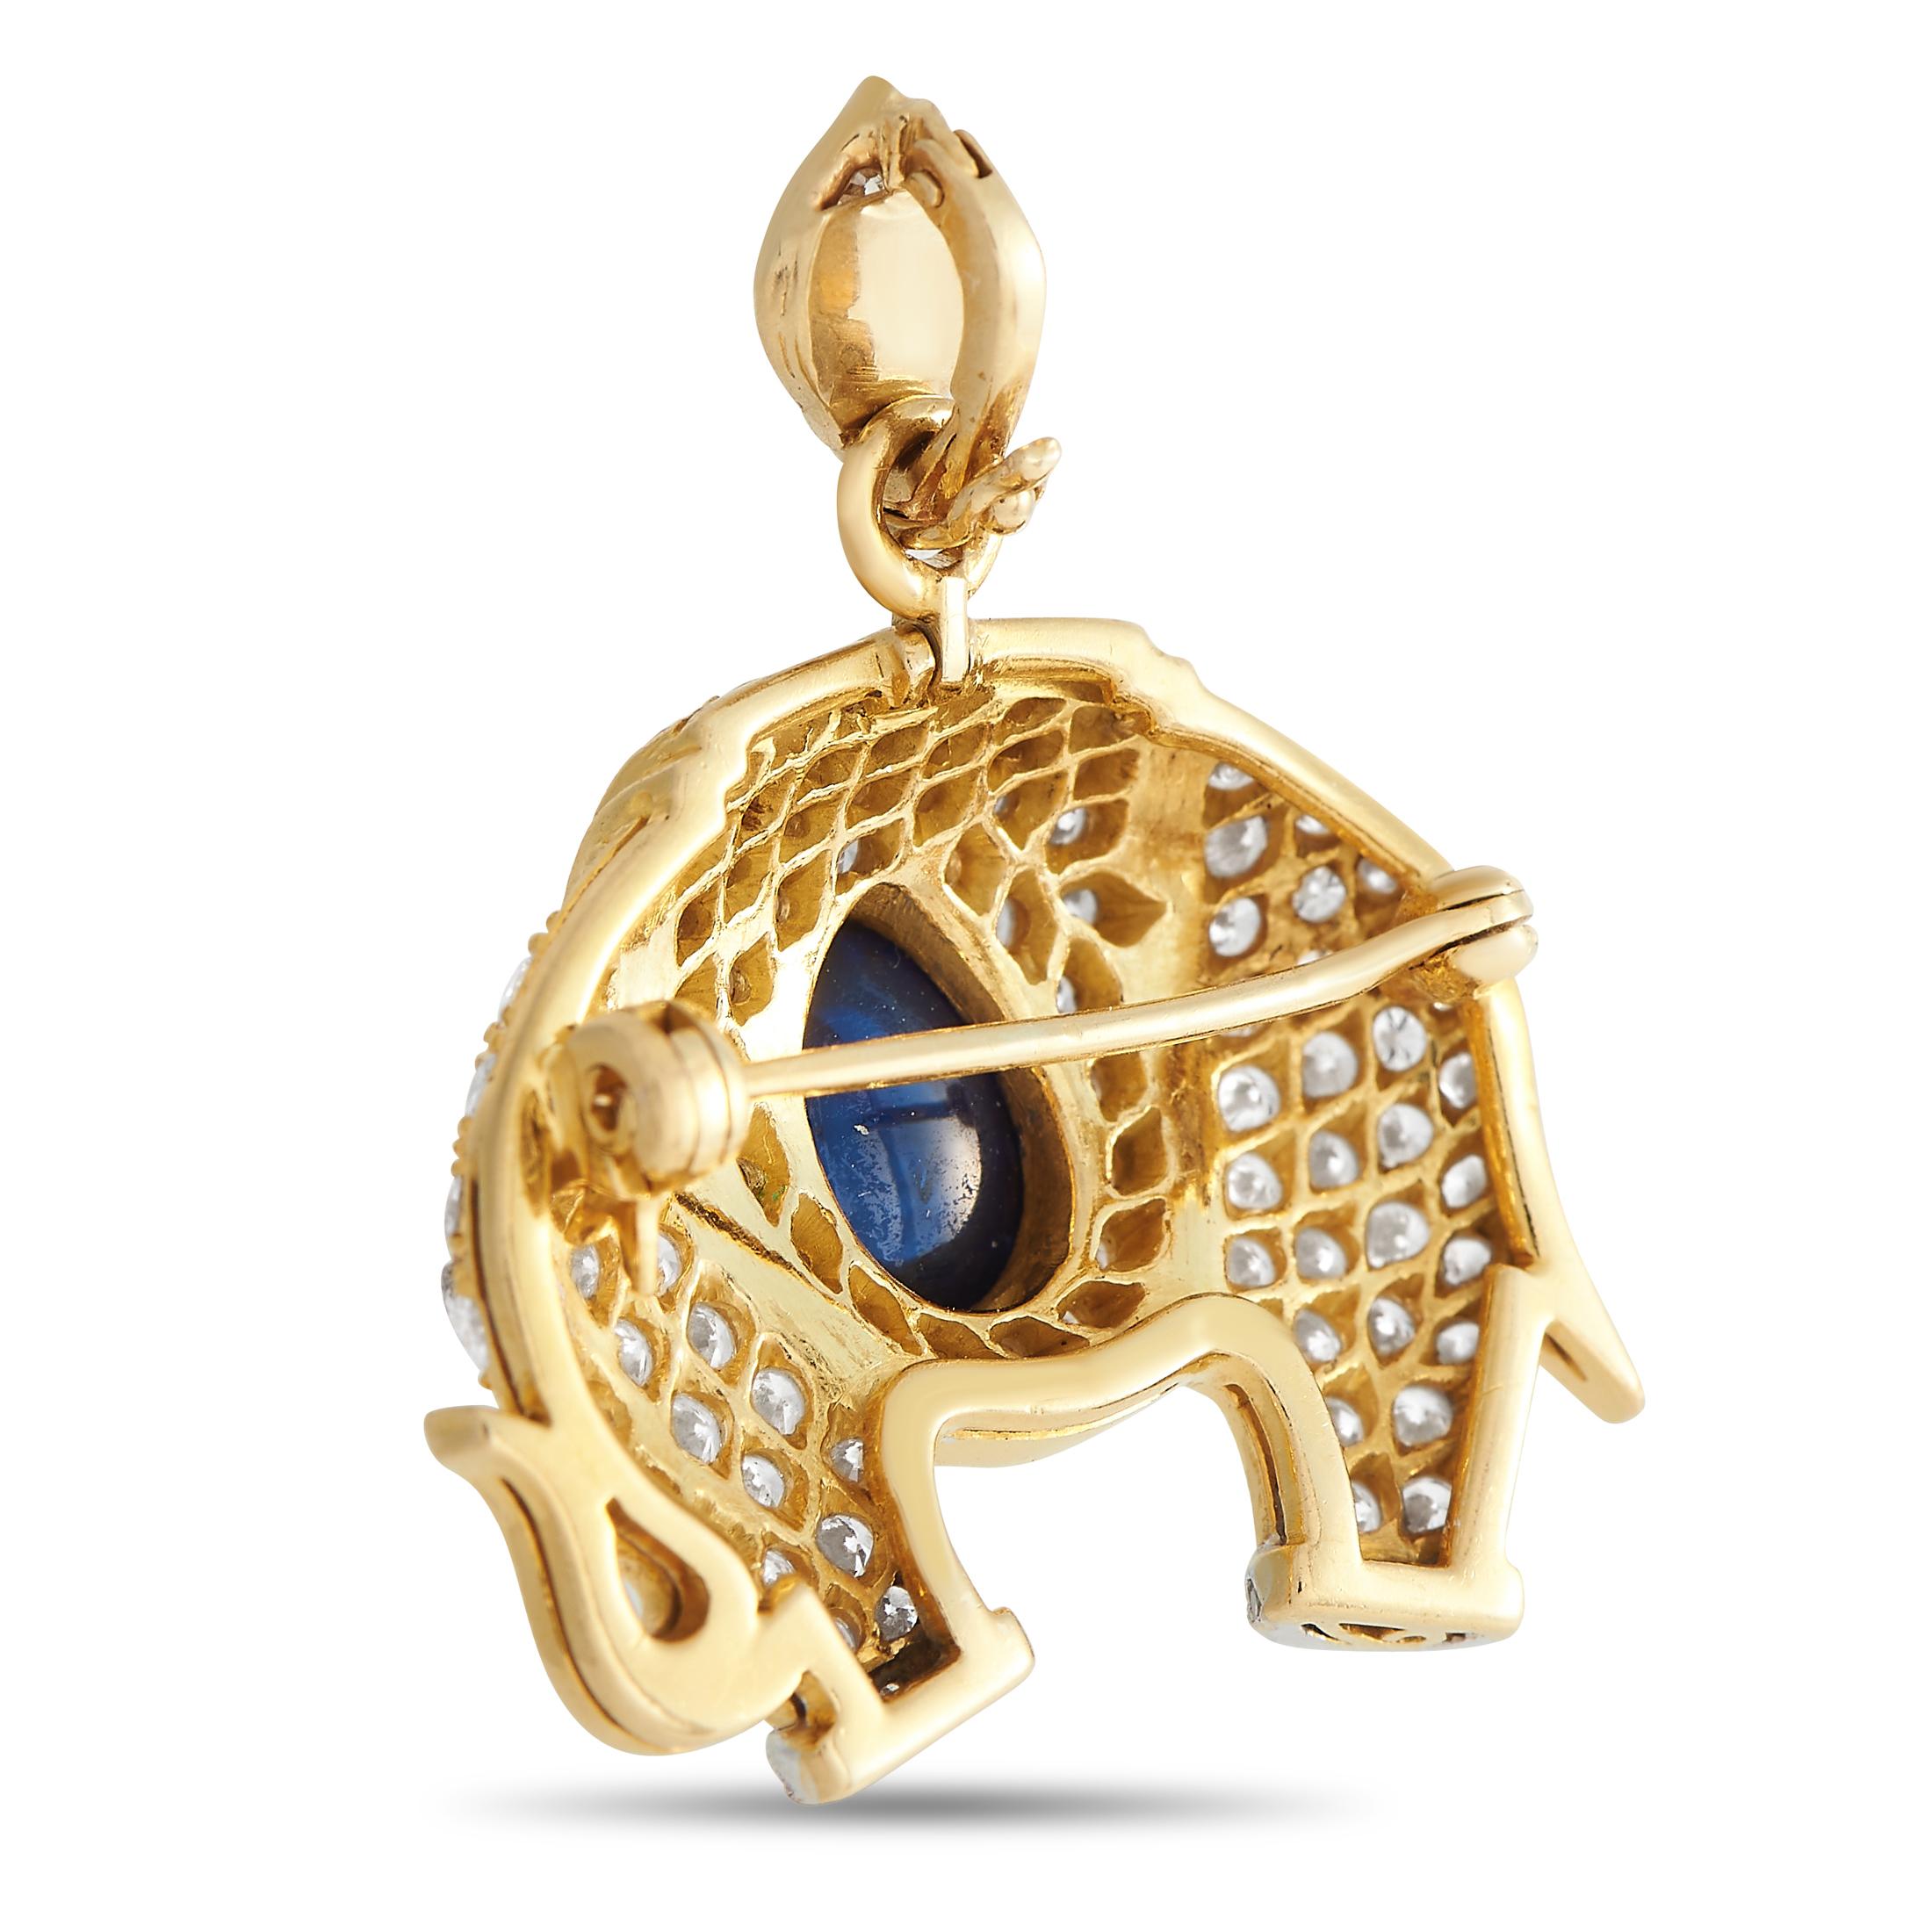 Bring a hint of whimsical elegance to your looks with this elephant brooch in 18K yellow gold. The sculpted elephant brooch is dressed in diamonds, with a pink sapphire for its eye and a blue pear-shaped sapphire cabochon as an accent. A hinged